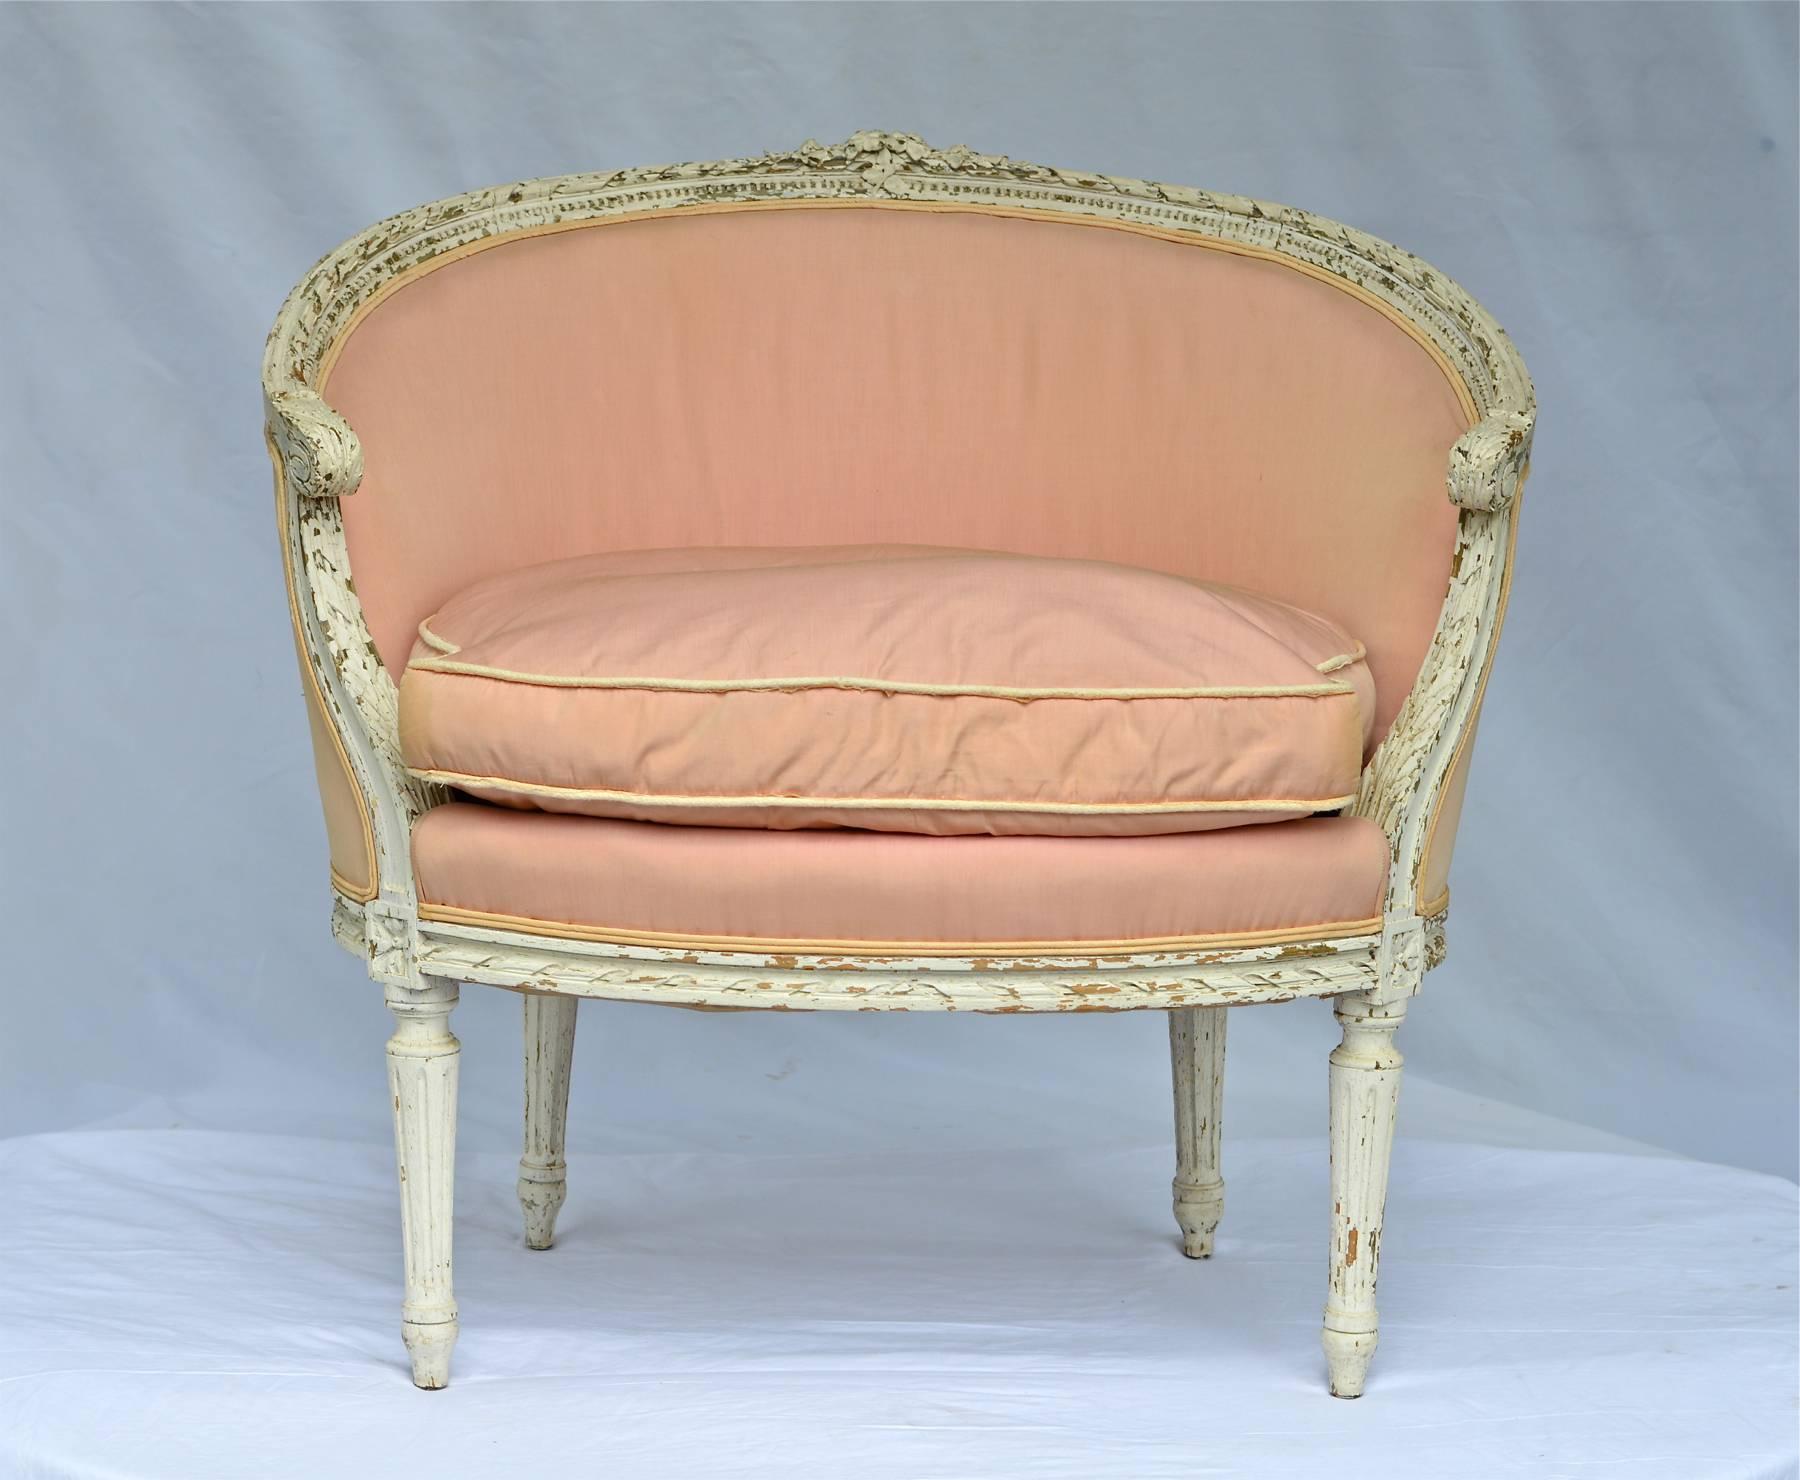 A charming late 19th Century painted Corneille Canapé in the Louis XVI style. The old chalky white paint surface shows chips and great character throughout the frames surface. The blush pink silk shows wear and sun fading throughout. The small